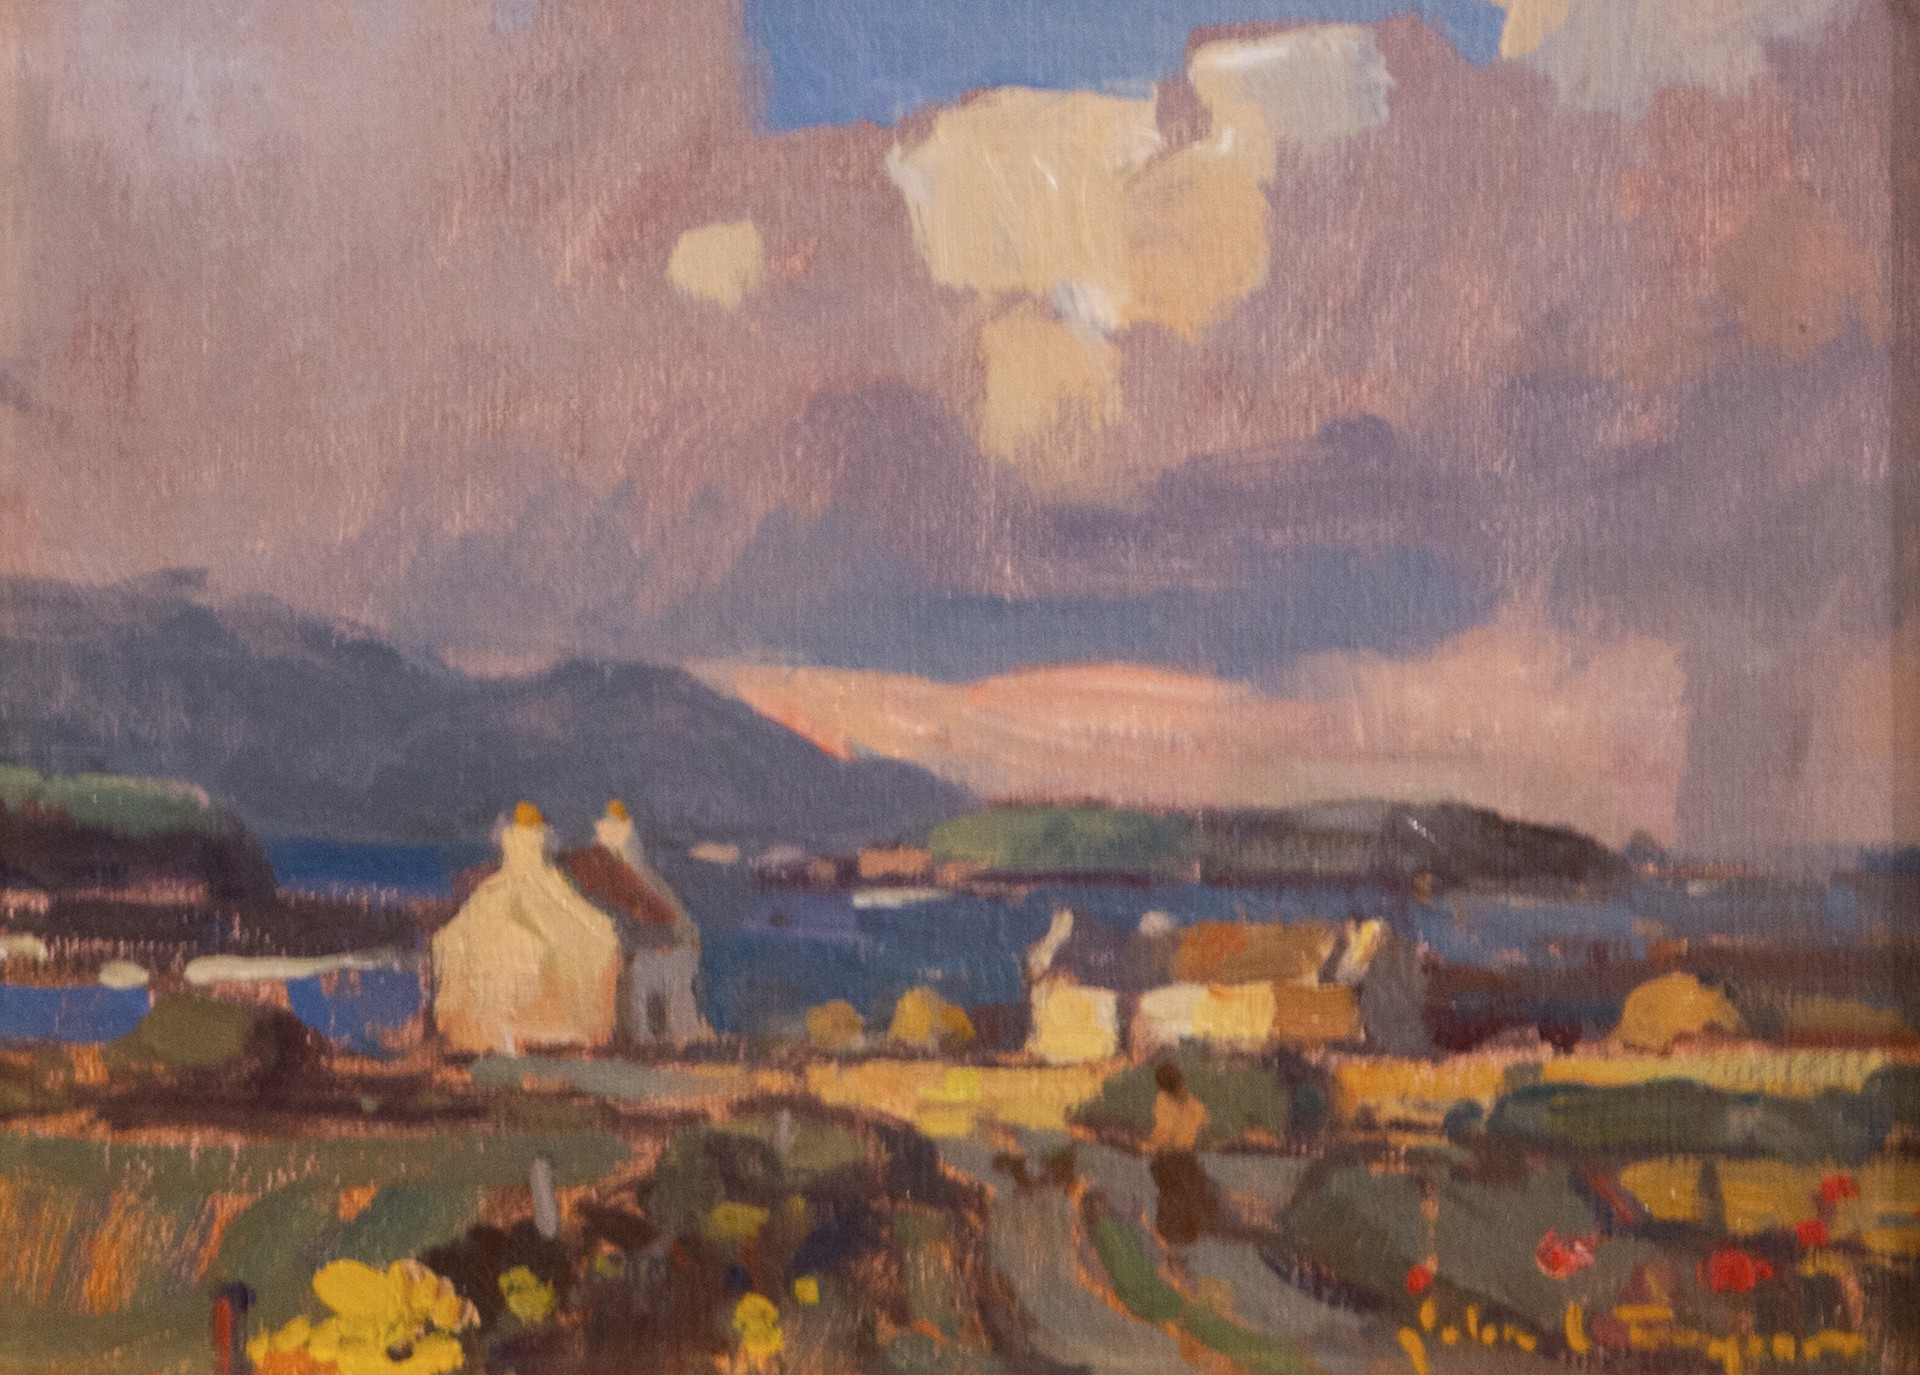 Passing Shower, County Clare Ireland by John C. Traynor